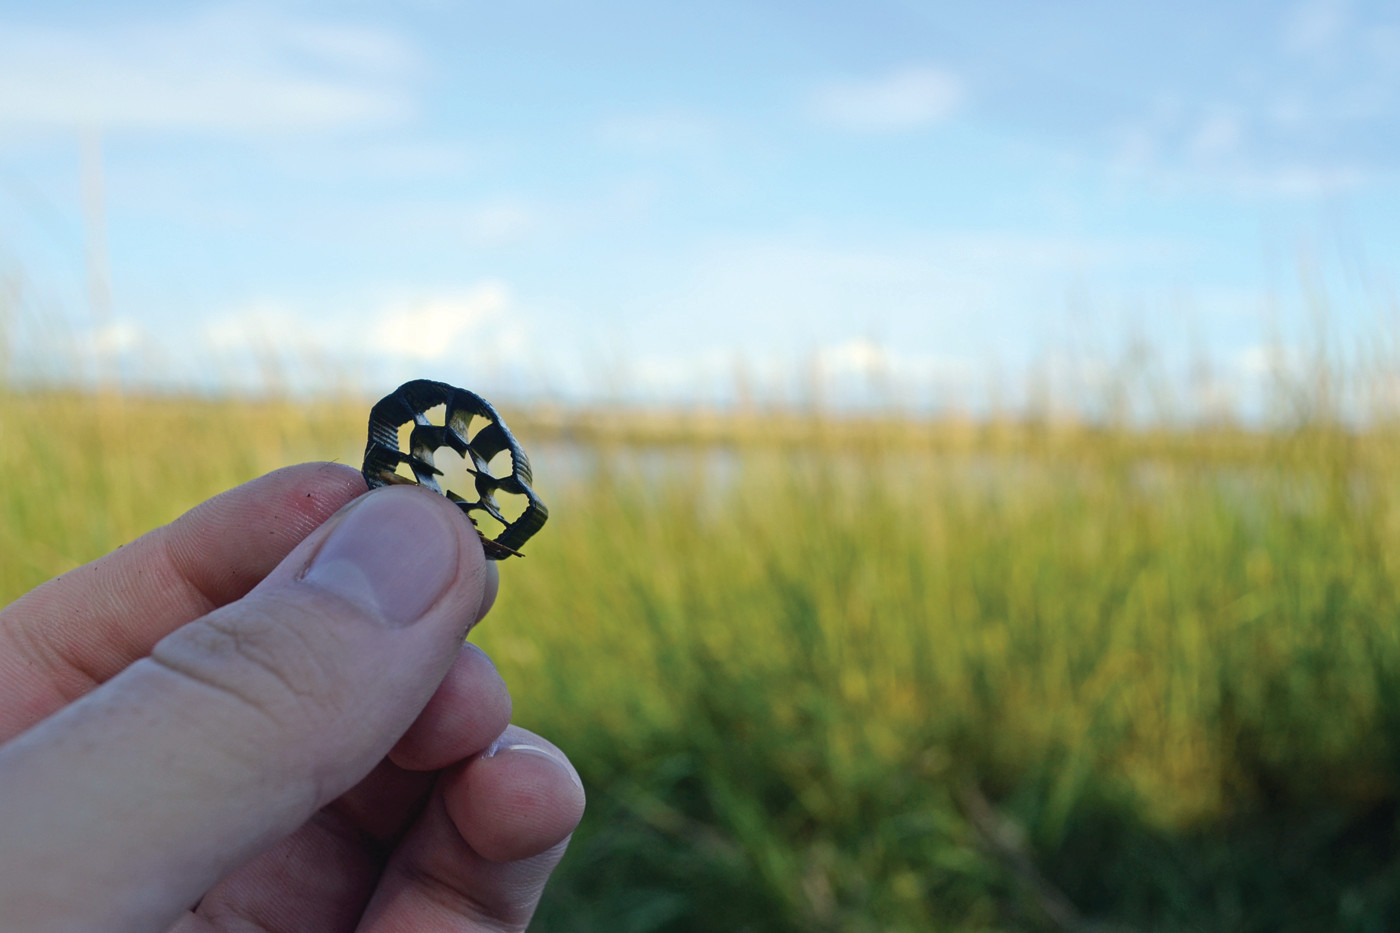 UNFORTUNATELY FAMILIAR: A black pinwheel-shaped piece of plastic was found among trash at Salter Grove on Tuesday. The debris is from an East Providence wastewater treatment facility that overflowed during a bad storm this past March.